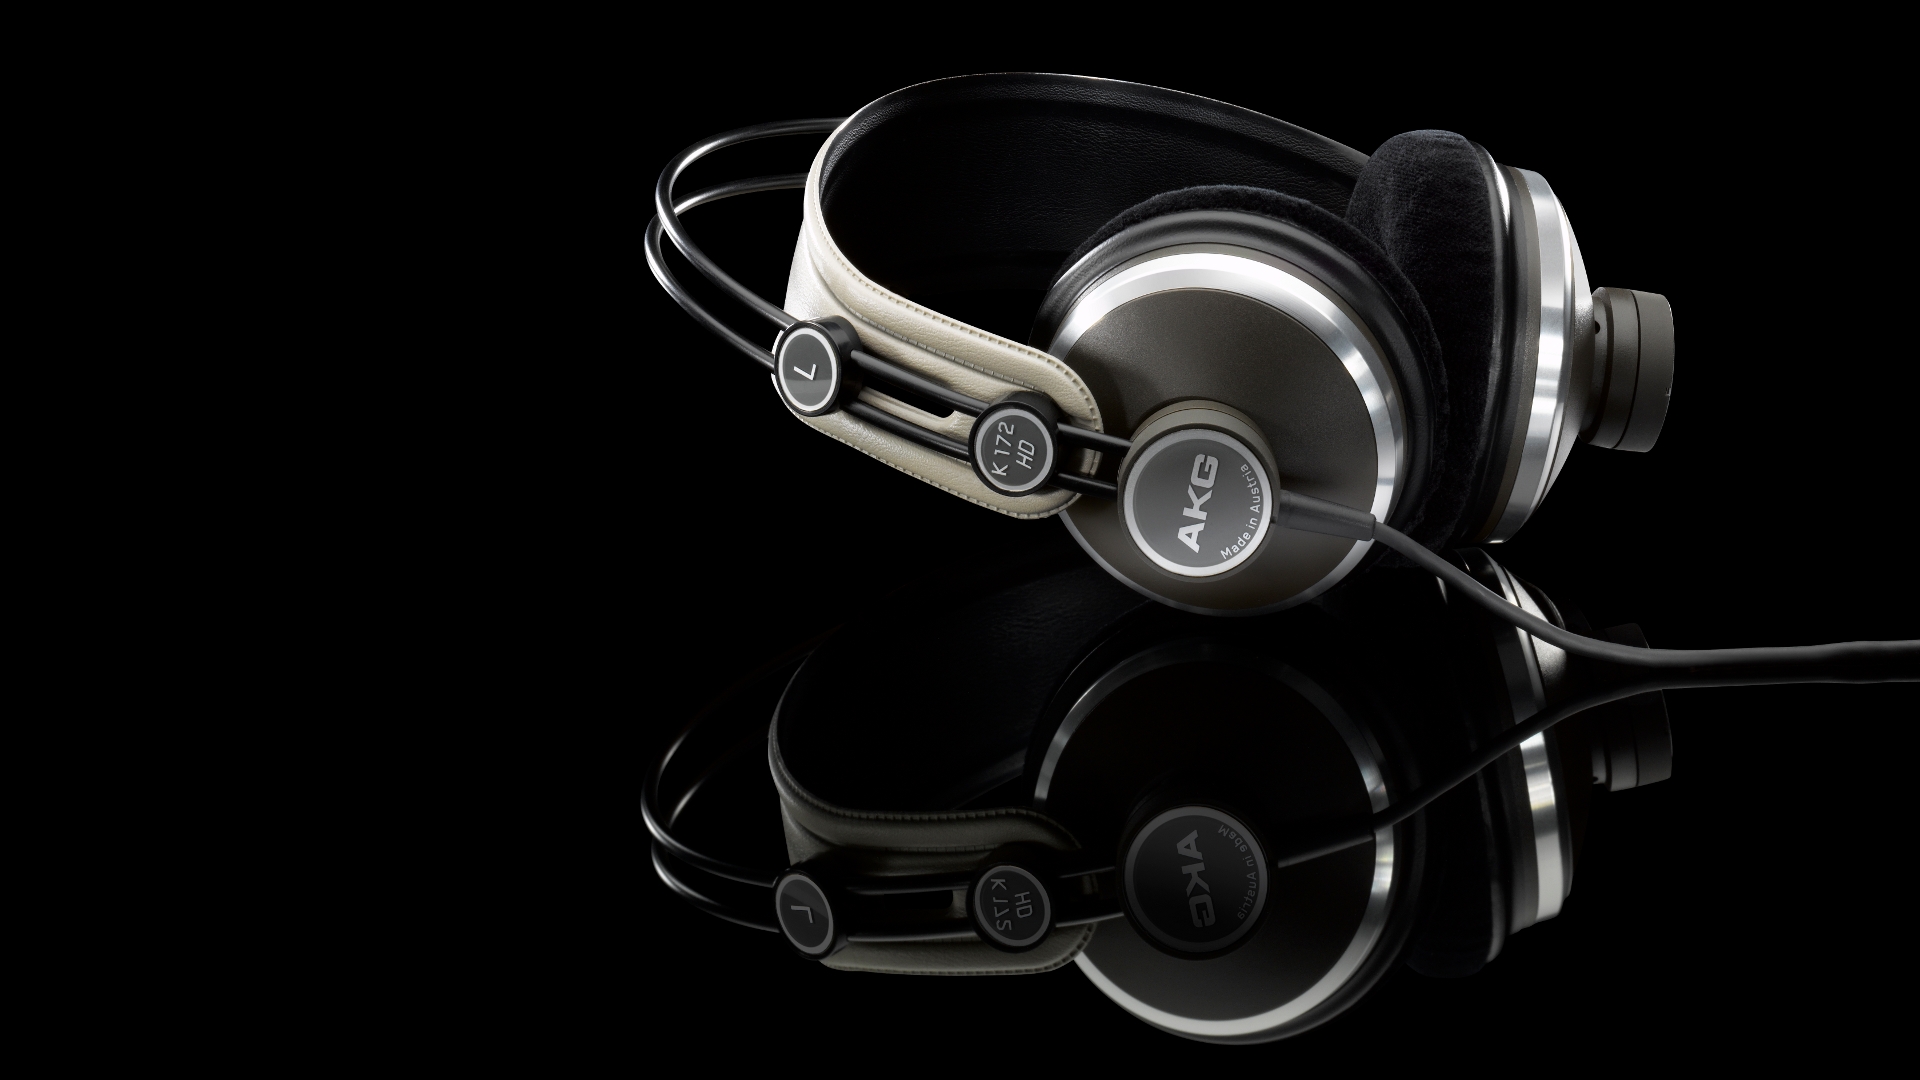 General 1920x1080 AKG headphones numbers reflection simple background